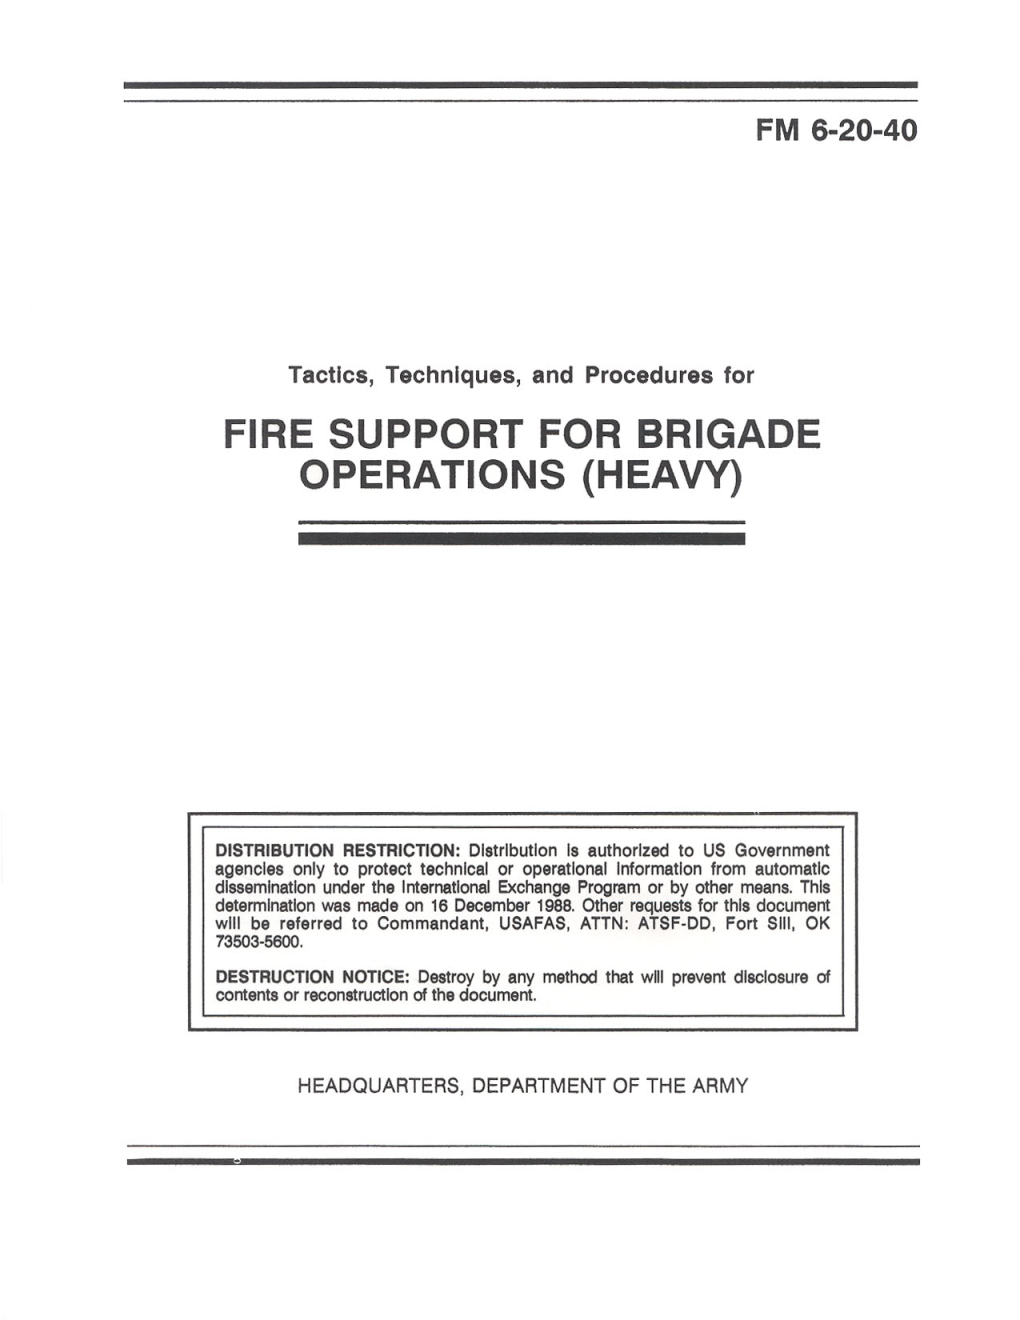 FM 6-20-40: Tactics, Techniques and Procedures for Fire Support For